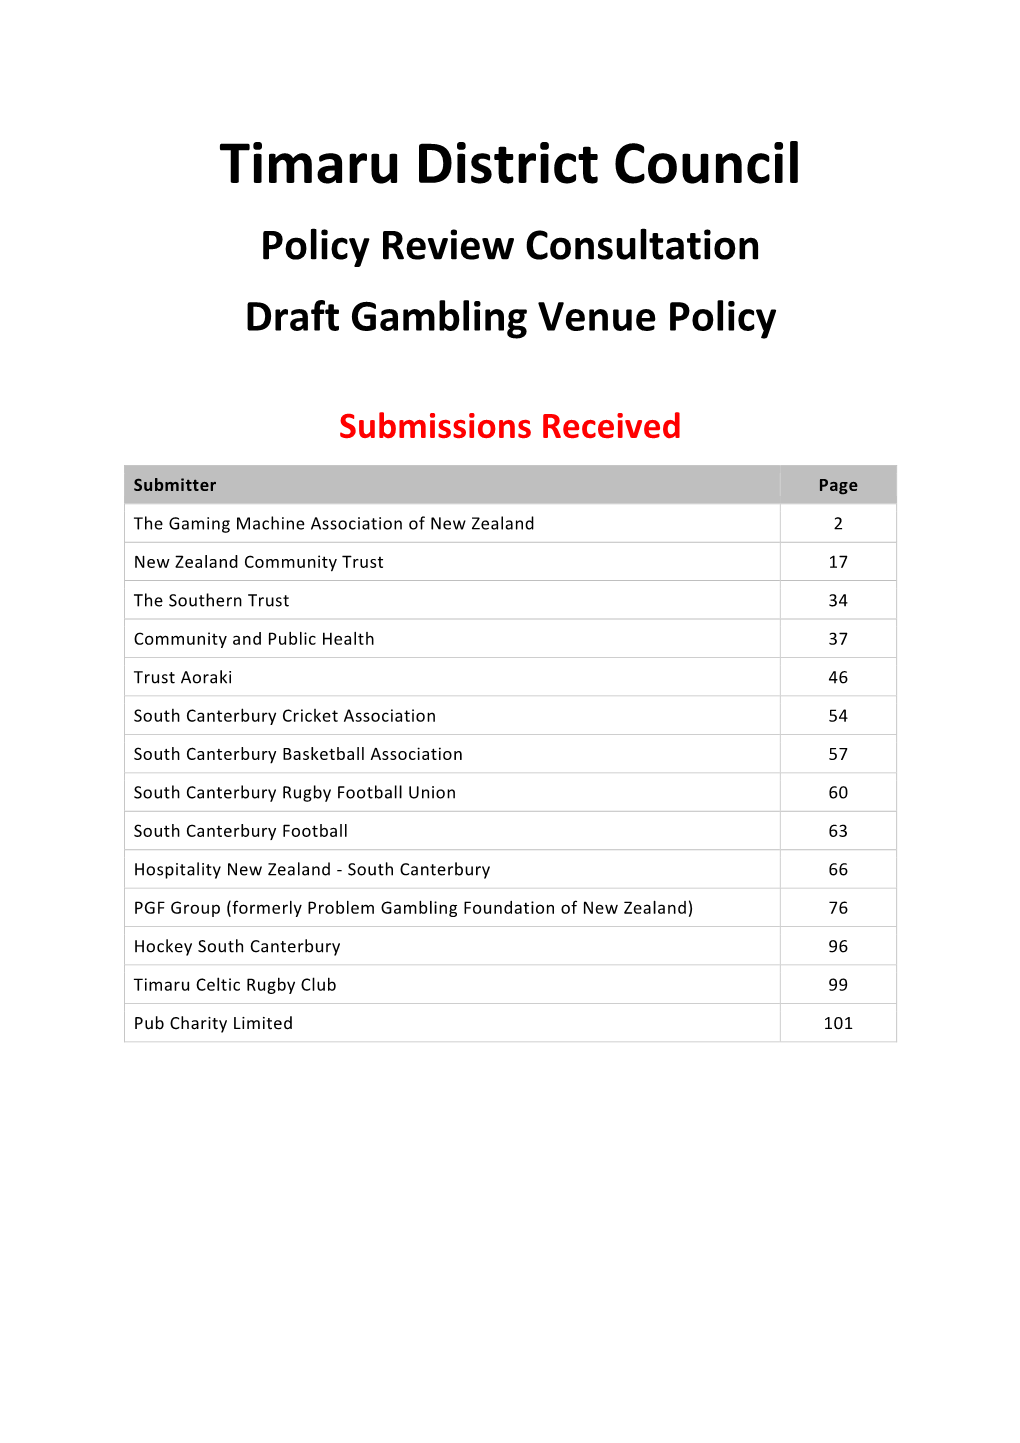 Gambling Venue Policy Review Submissions